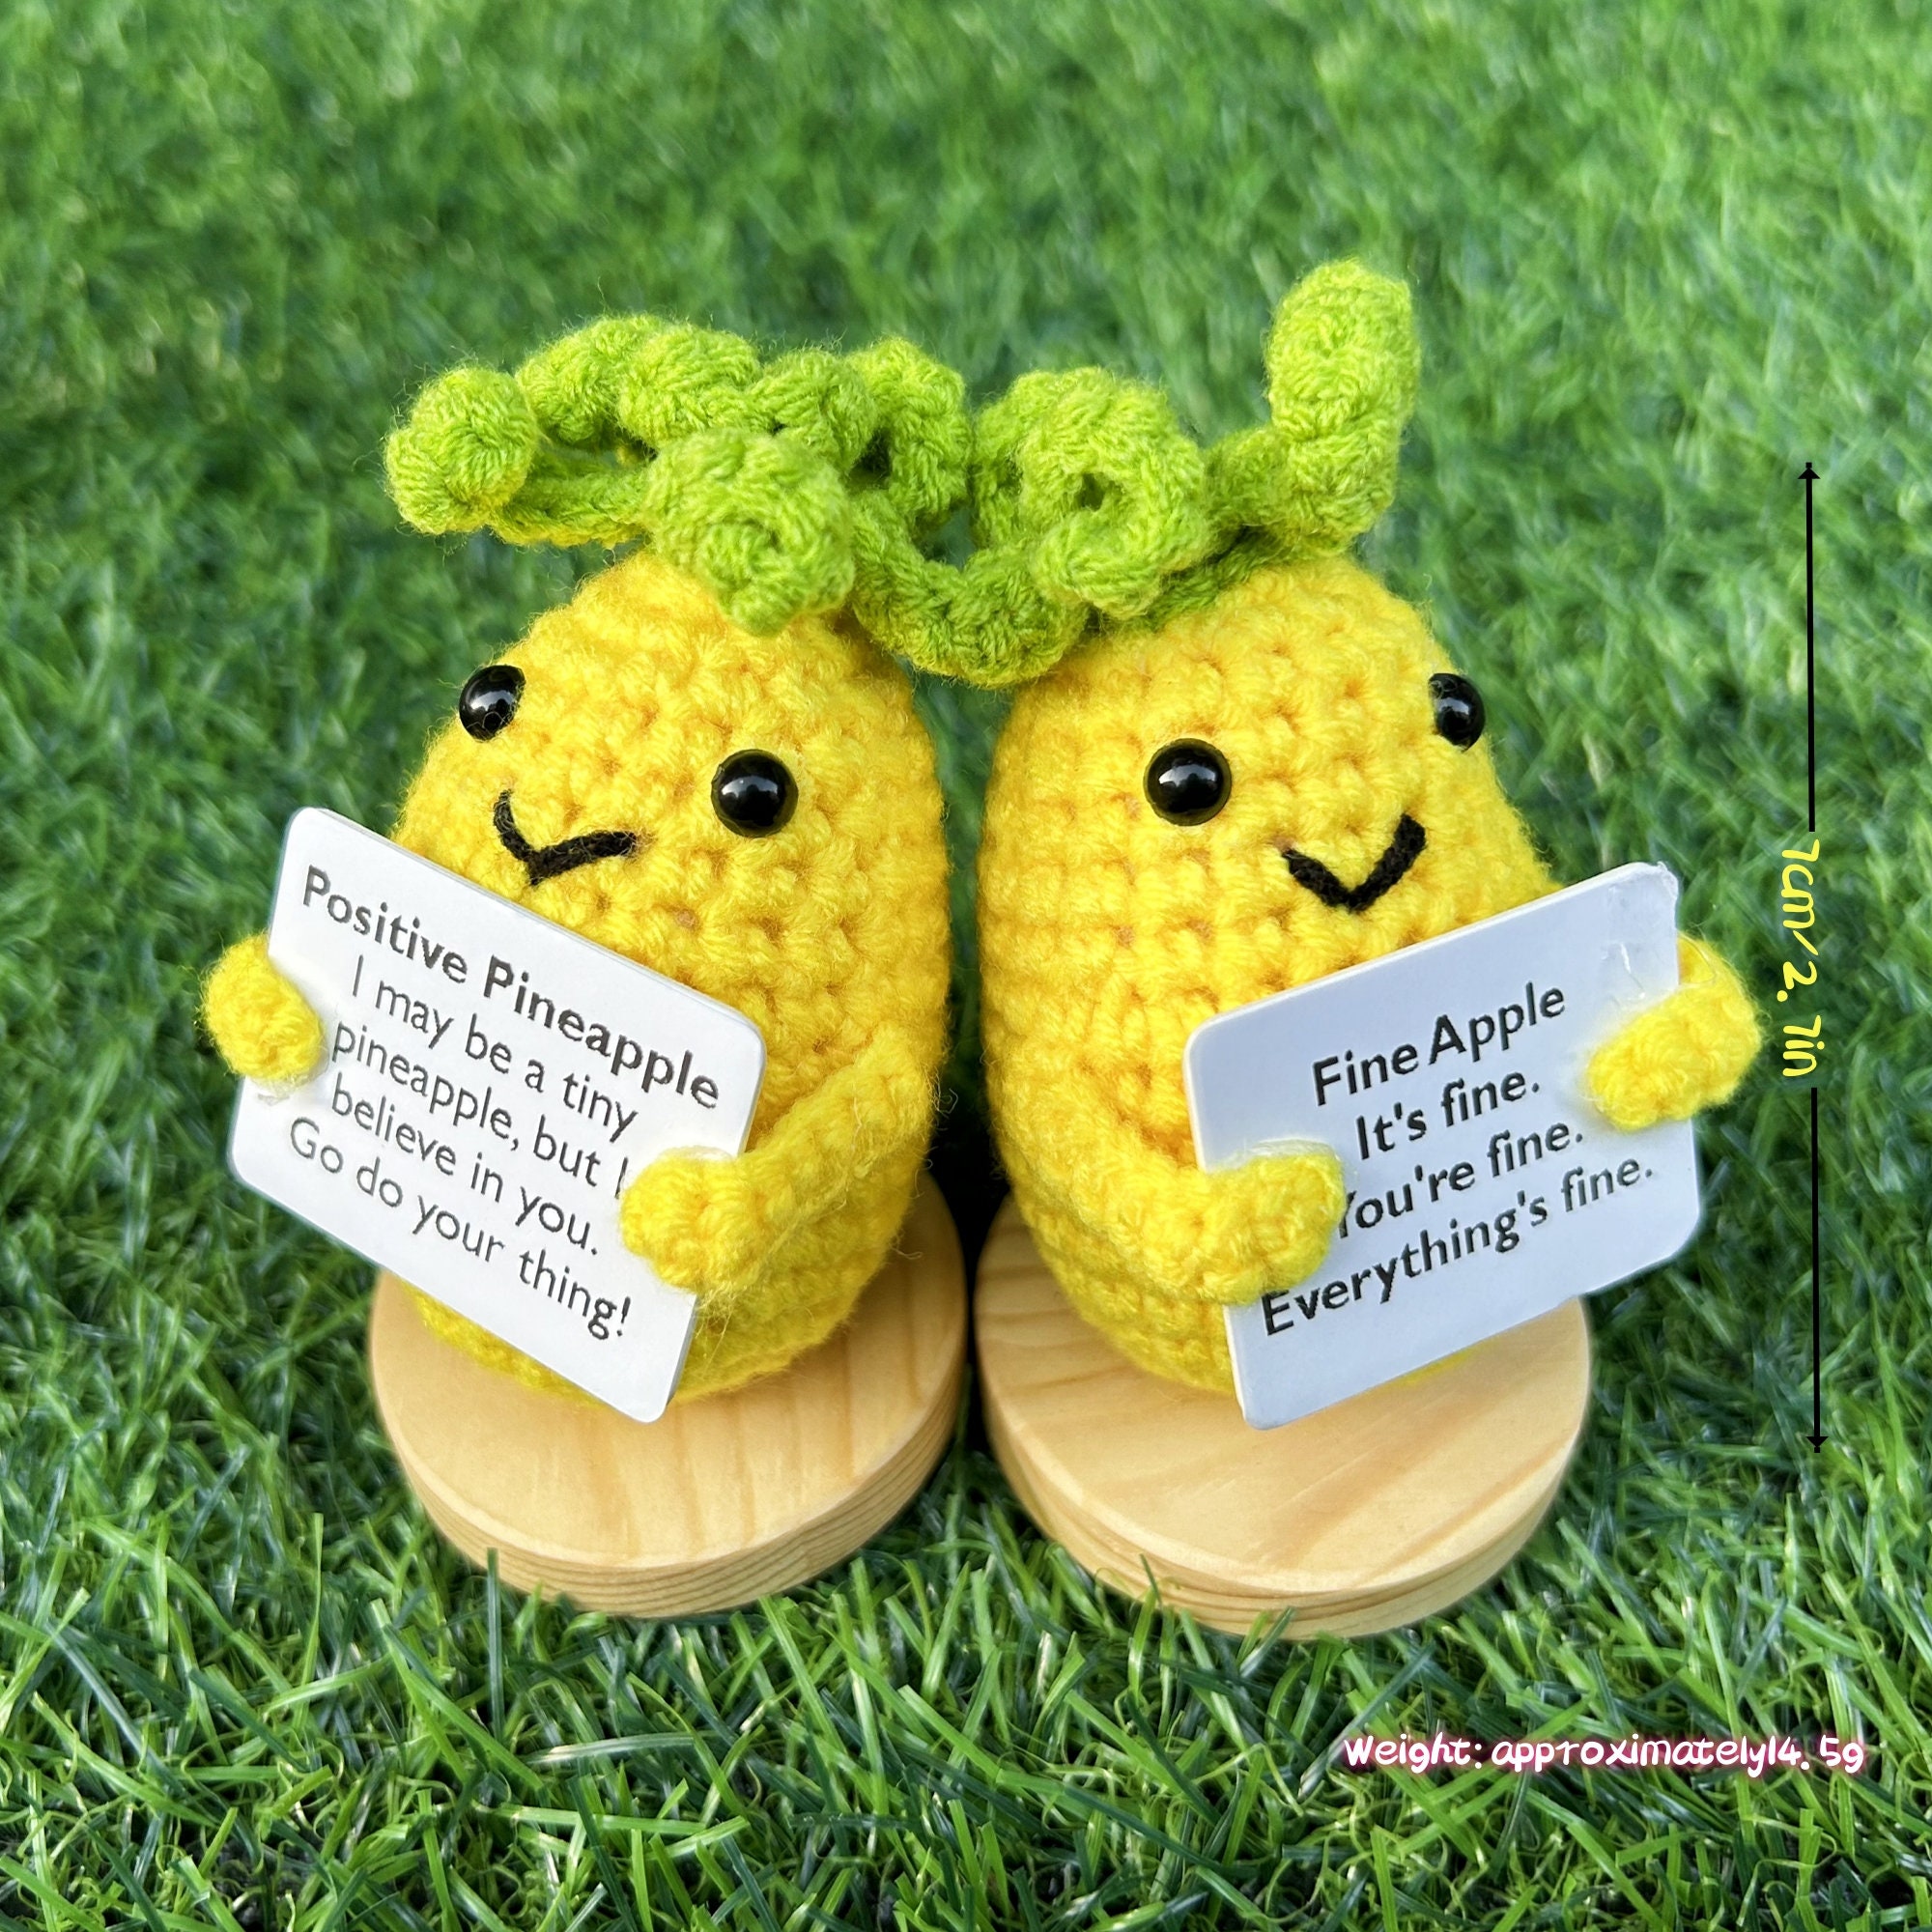 Crochet Avocado With Emotional Support, Positive Affirmation Cards,  Motivational Gifts for Friends, Cute Crochet Home Decor, Co-worker Gifts 